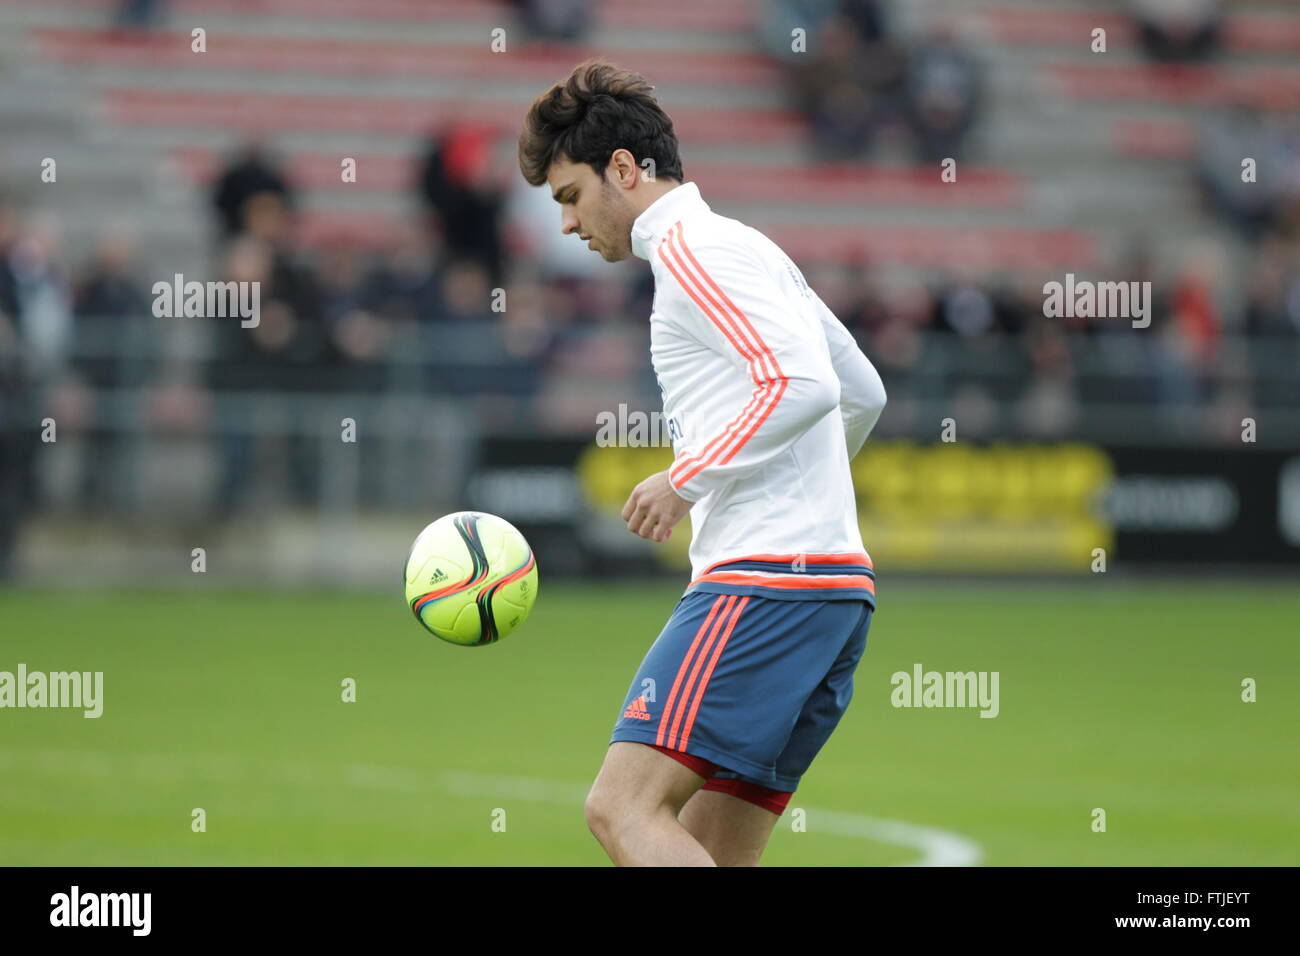 Angers, France, February 6, 2016: Ligue 1 Clément Grenier action at dumatch between SCO Angers - Olympique Lyonnais Stock Photo